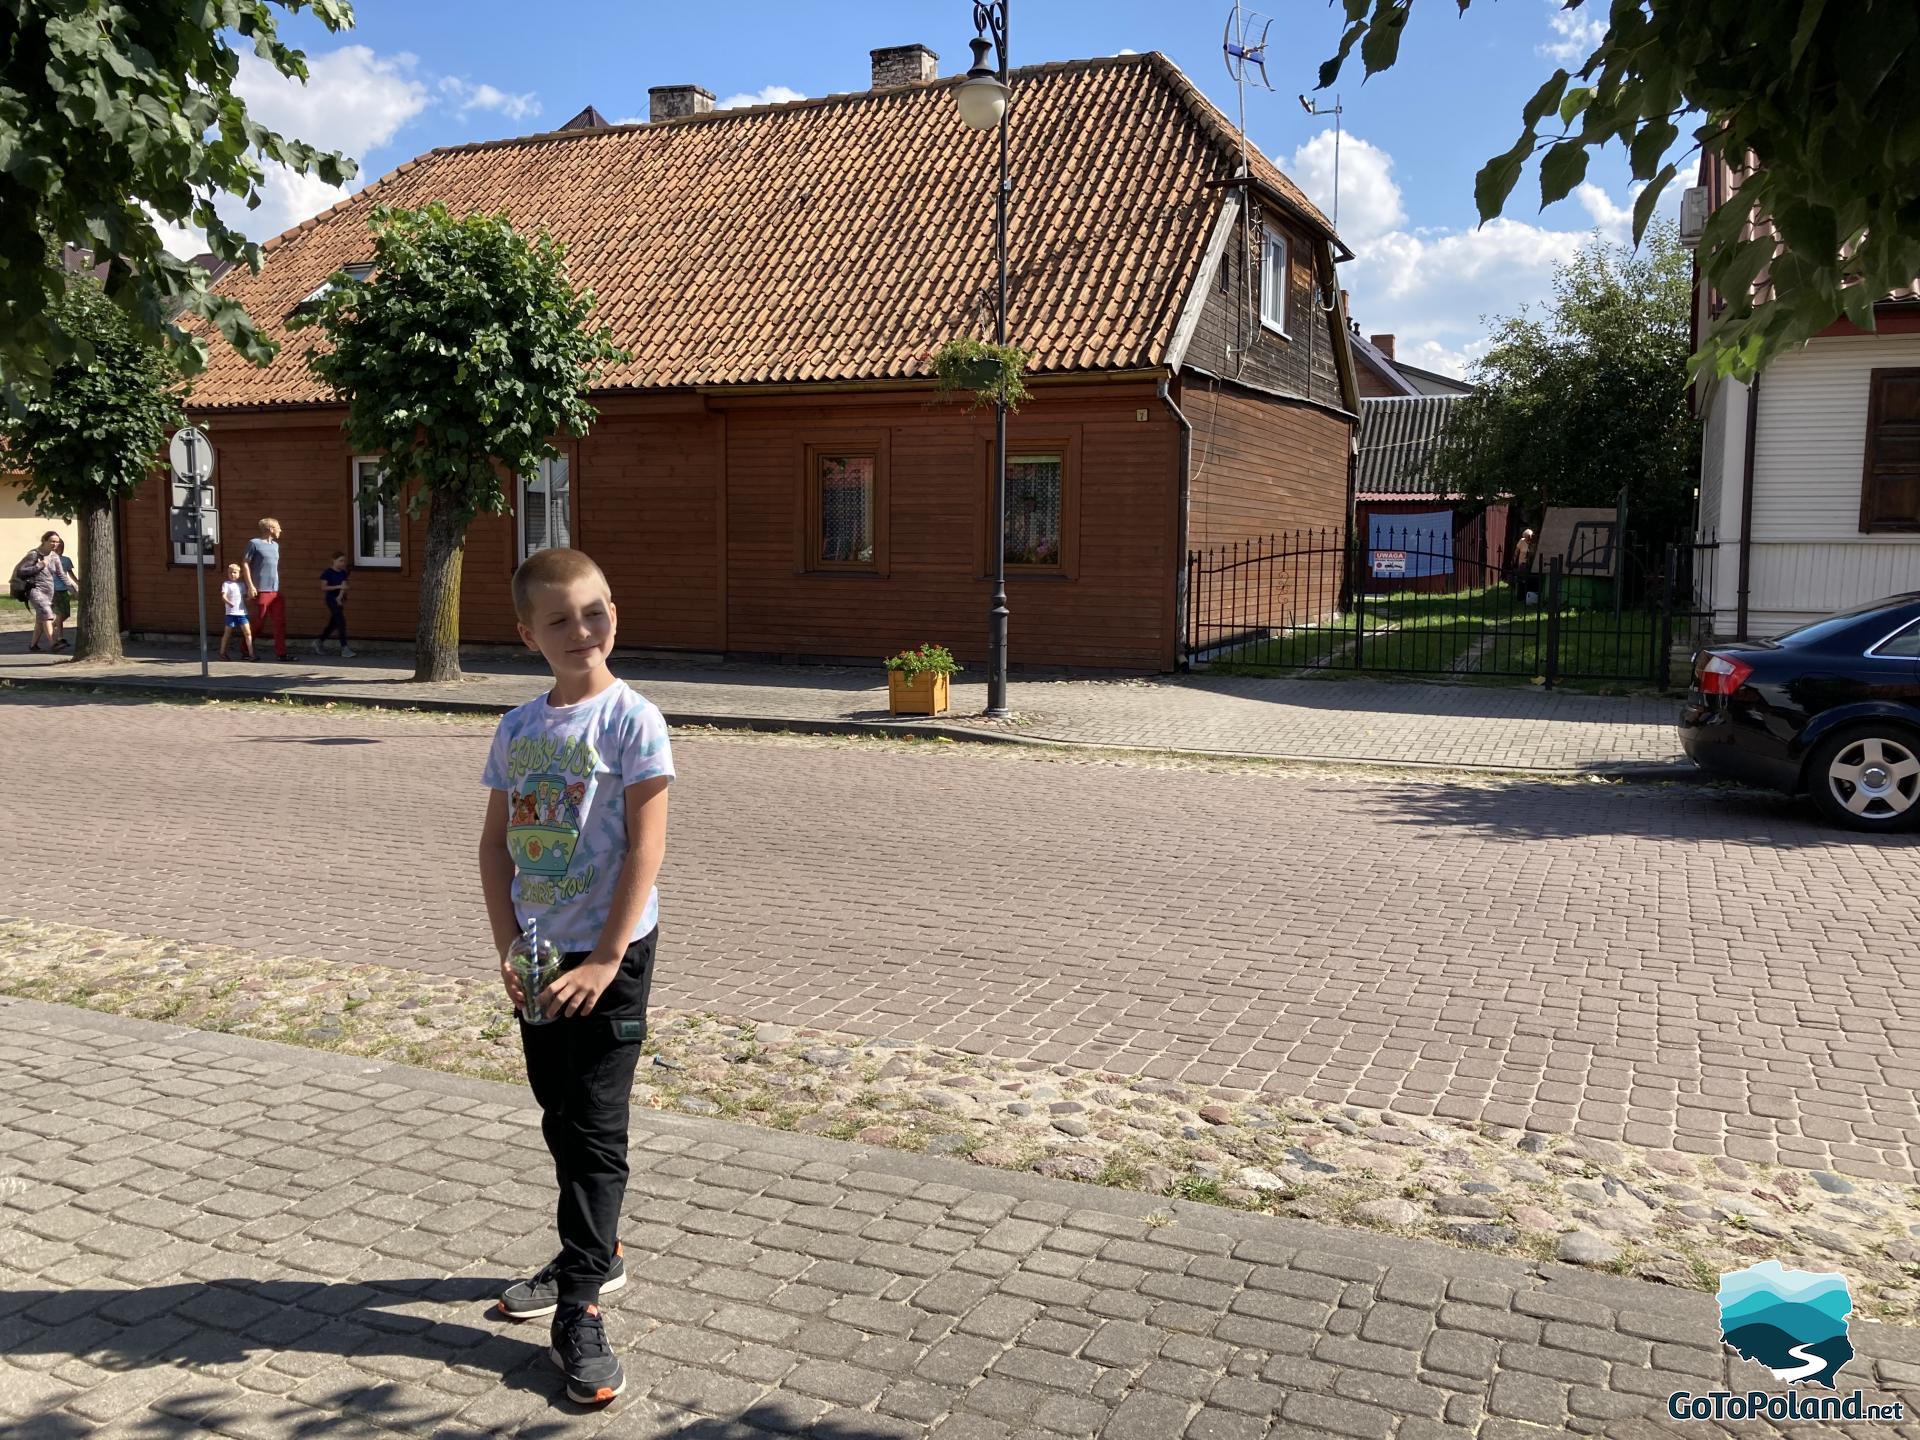 the boy is standing by the street, behind him a brown wooden house